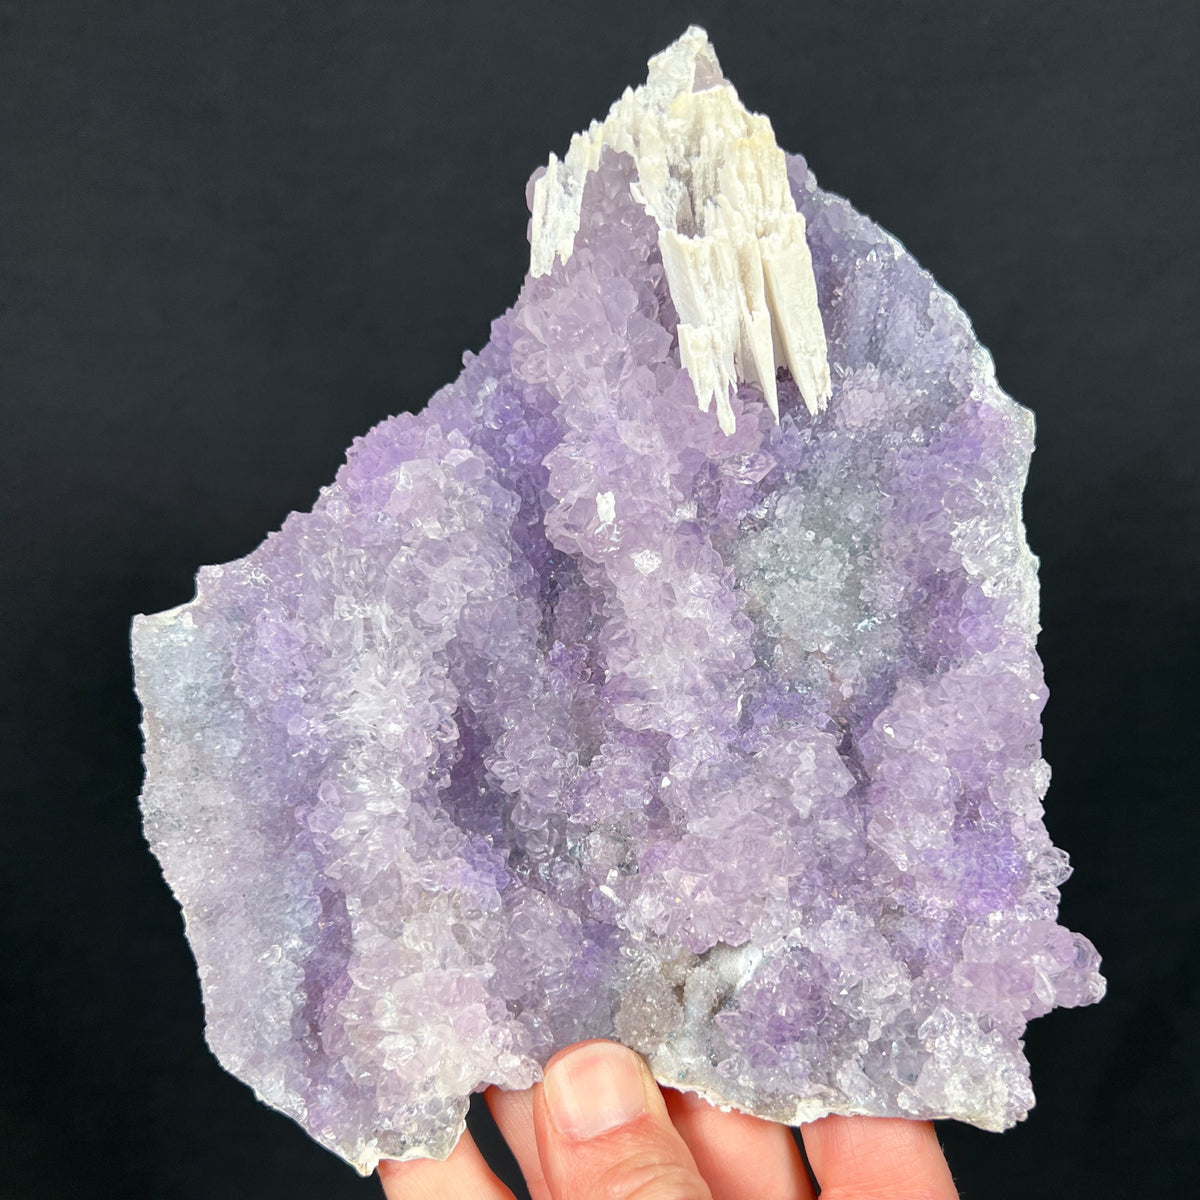 Purple Amethyst Crystals on large rock plate with white anhydrite crystals